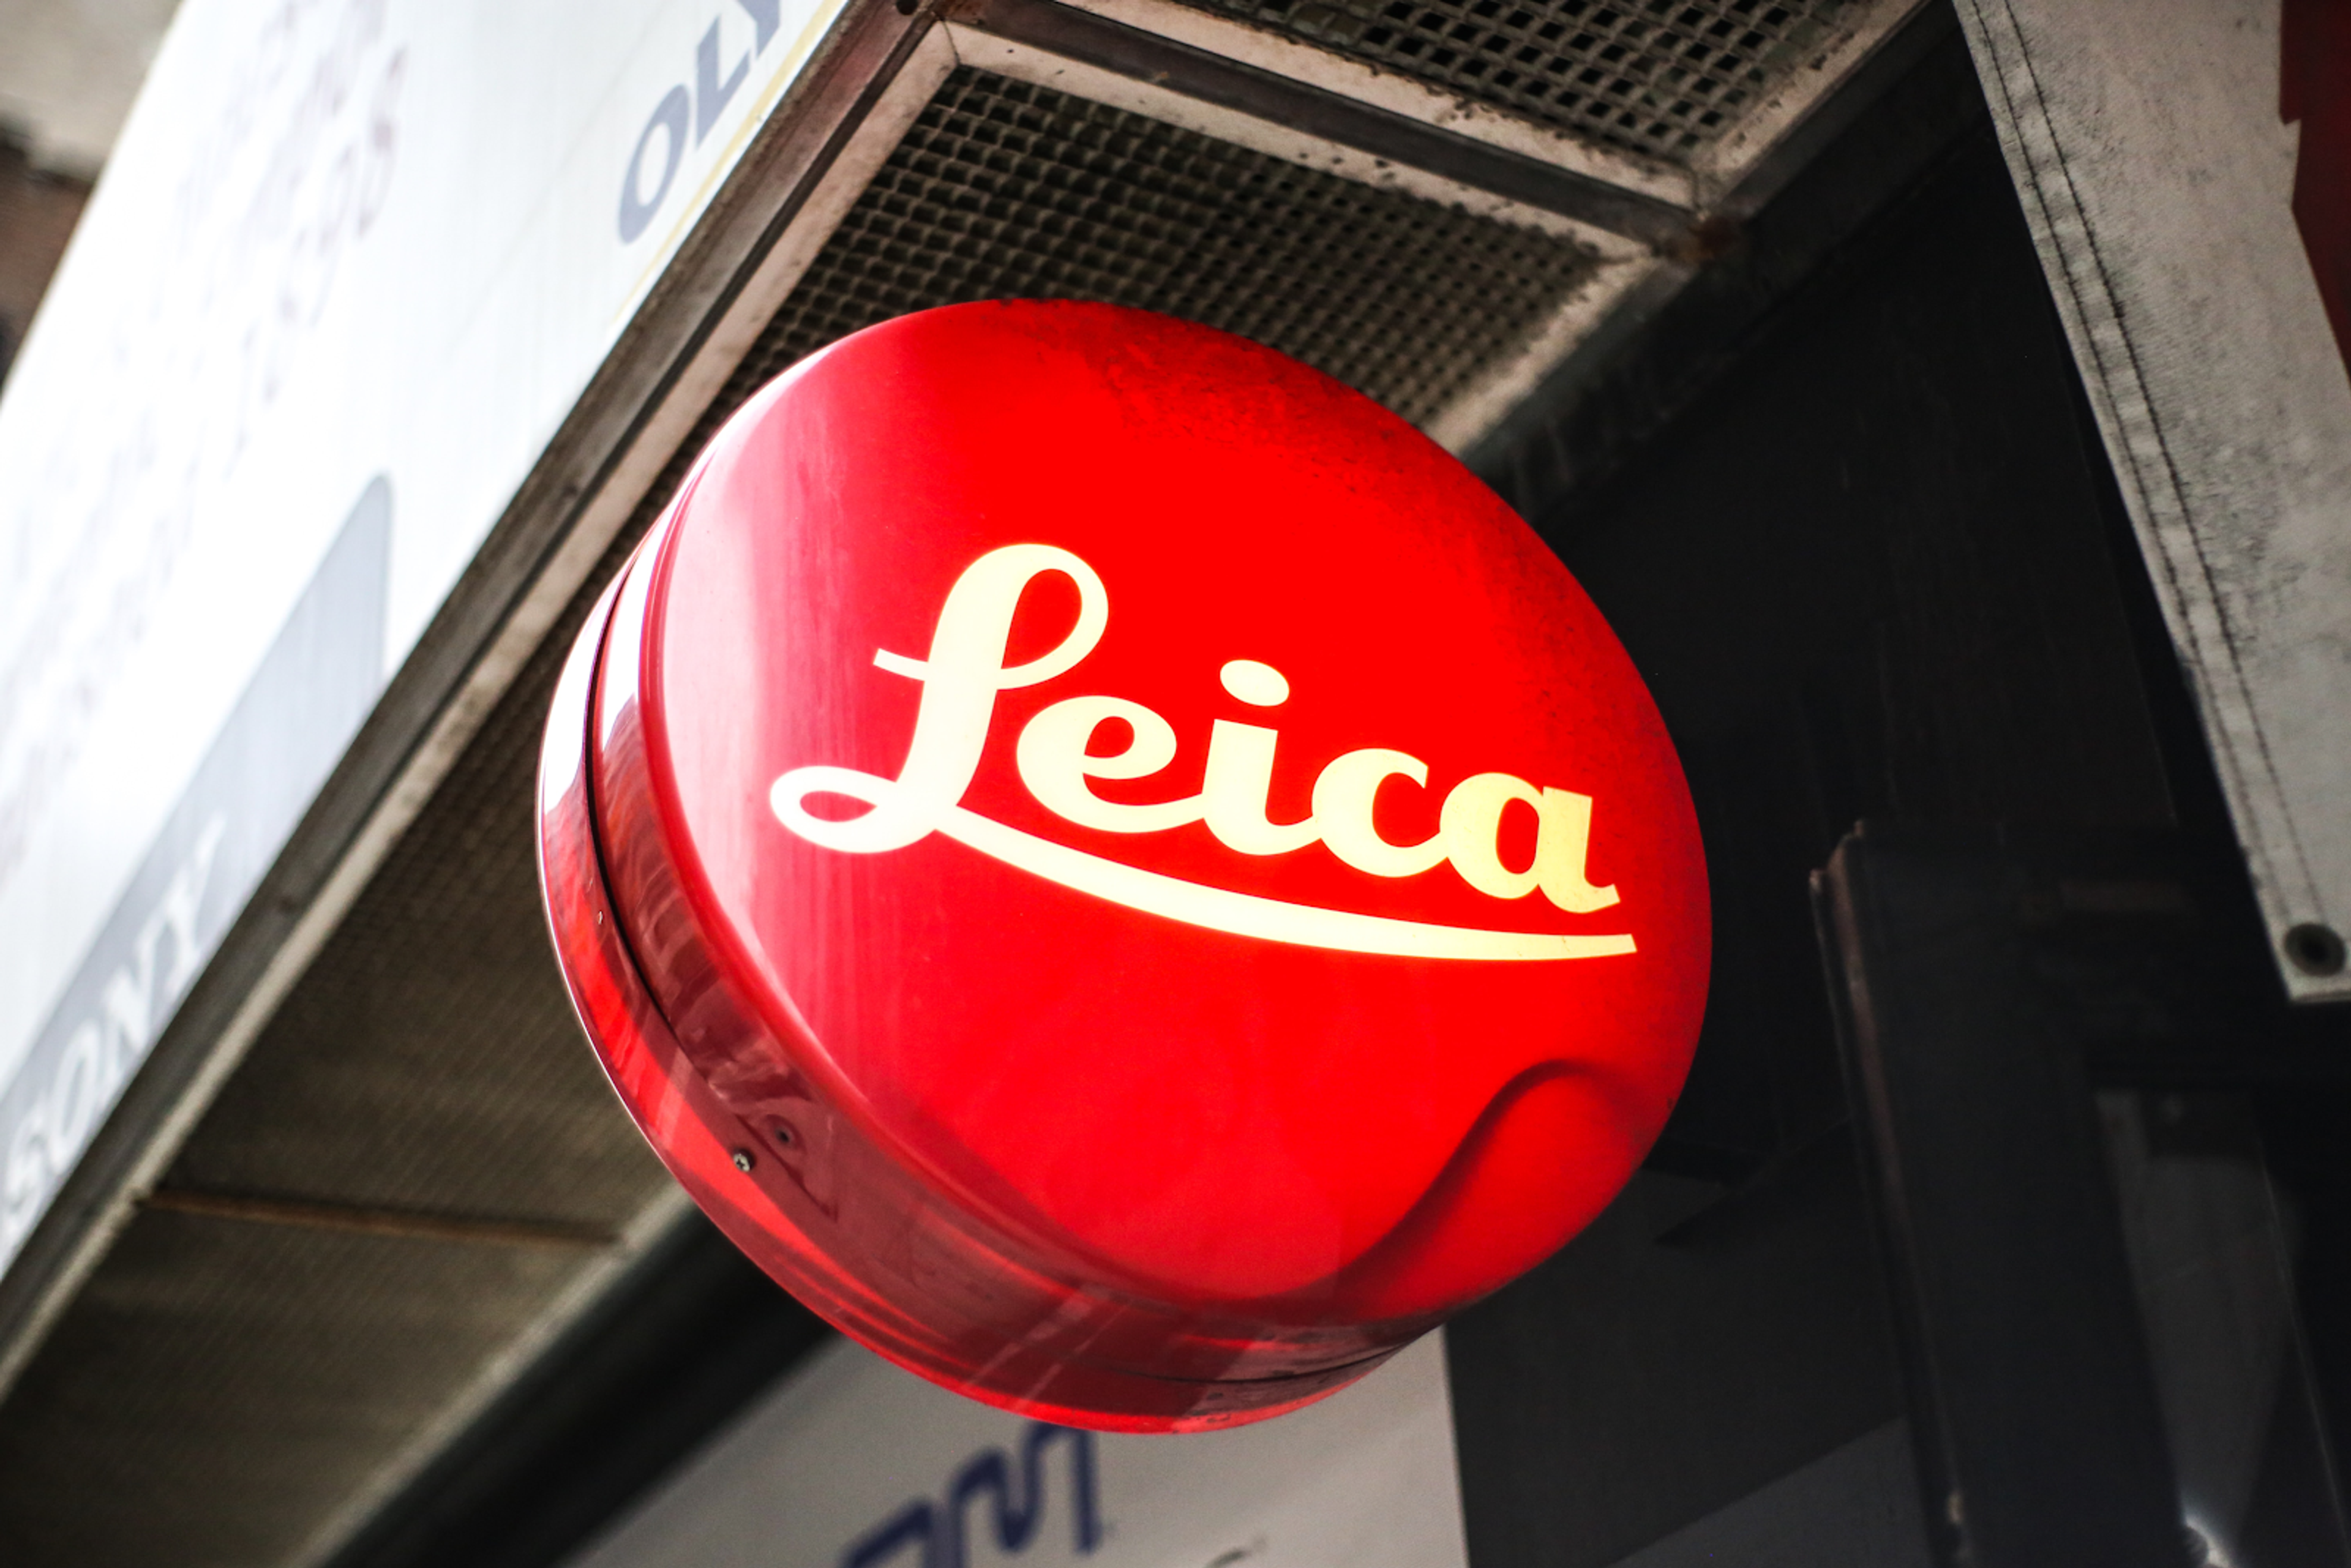 Red round logo of Leica